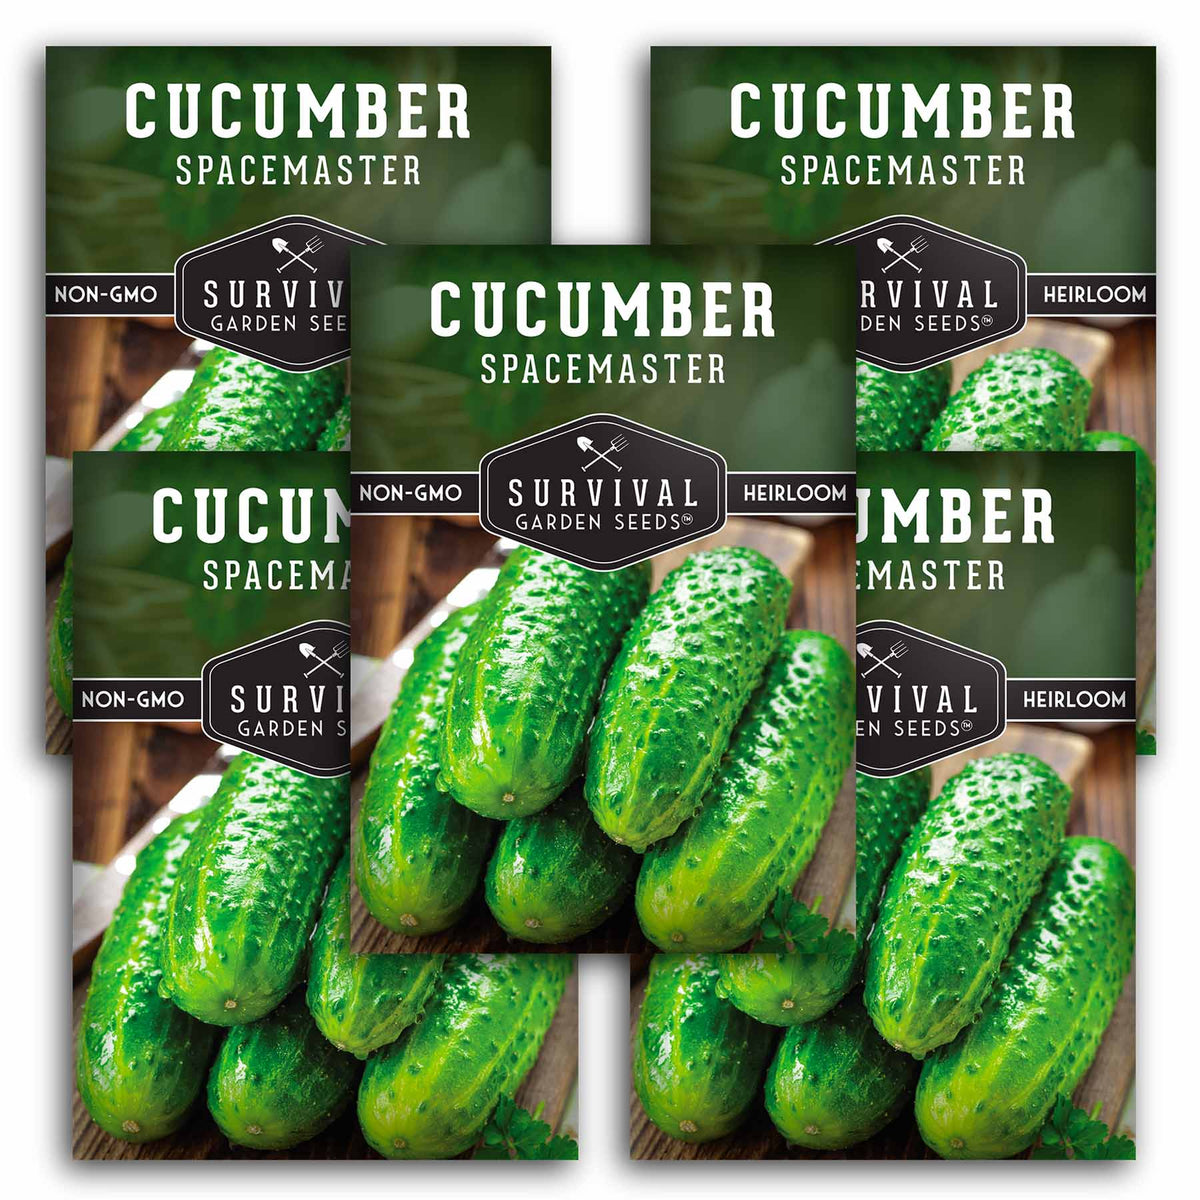 5 packets of Spacemaster Cucumber seeds